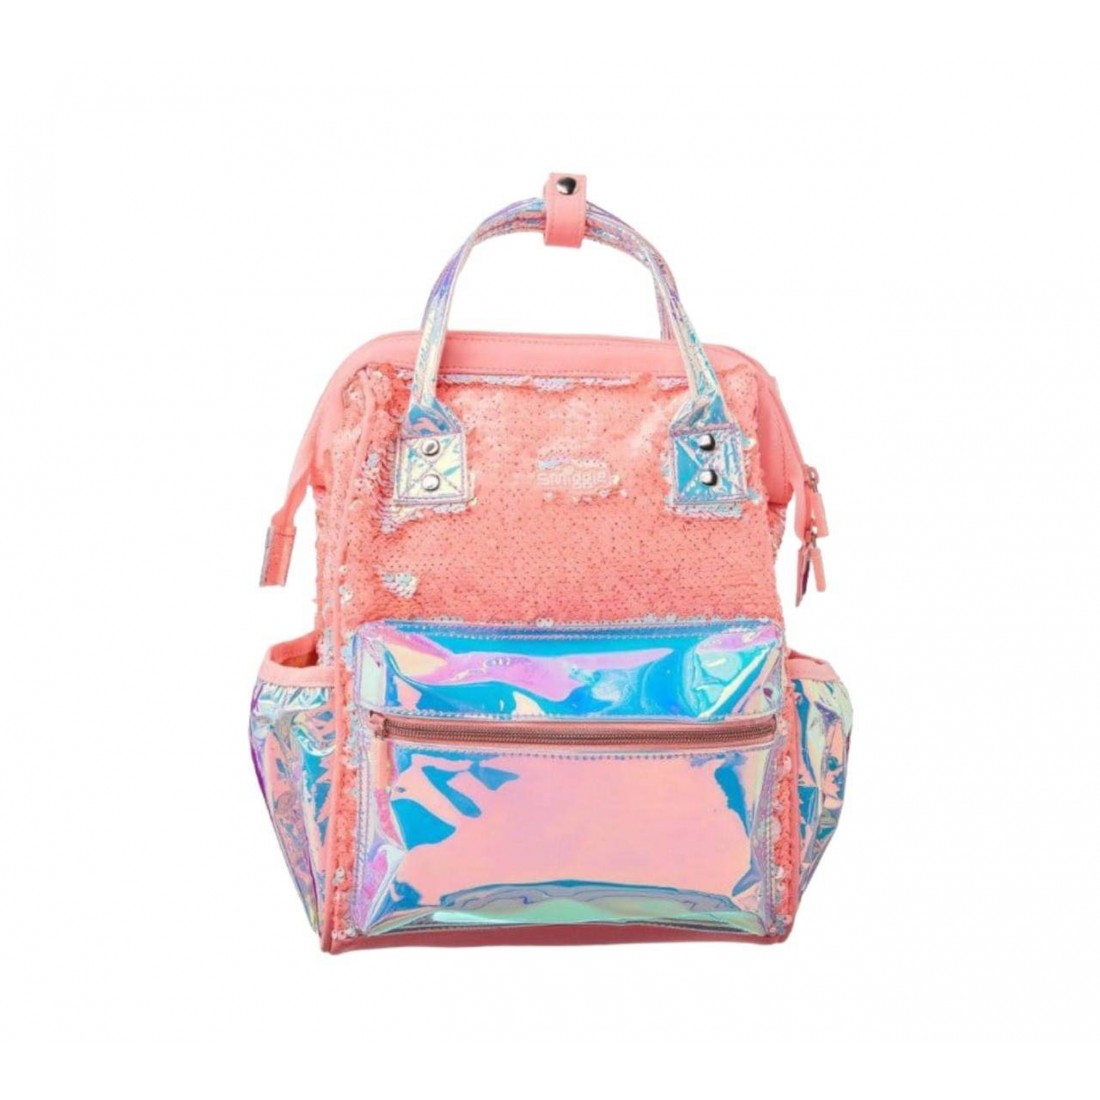 Shop Smiggle Classic Backpack - Smiggle, delivered to your home | TheOutfit